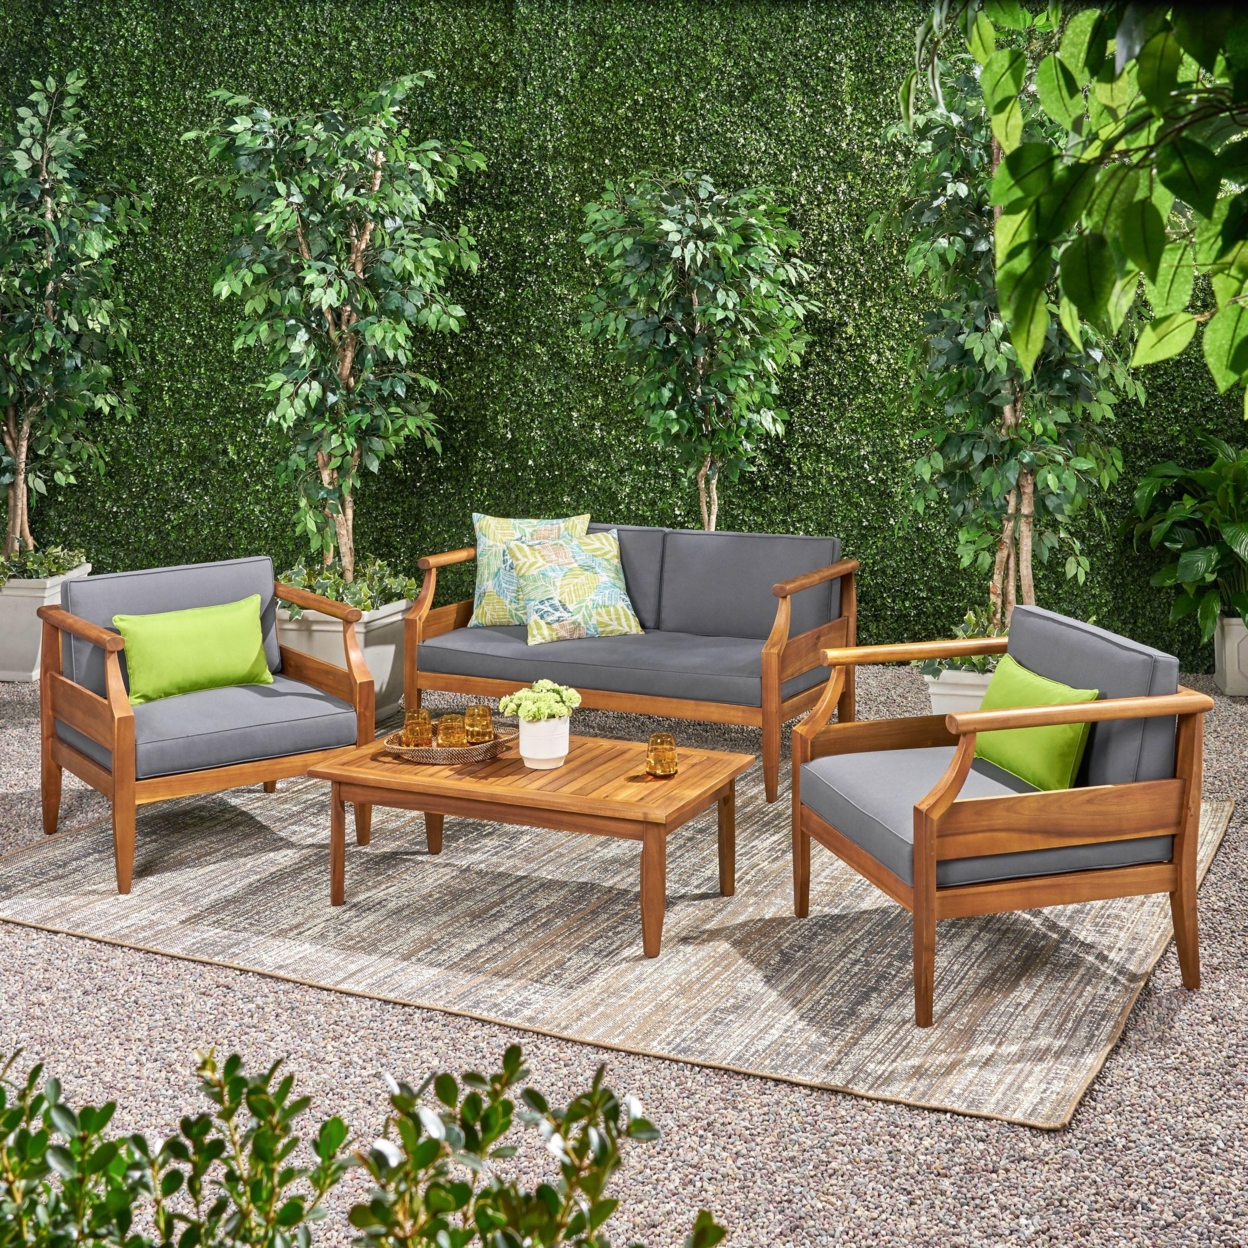 Bianca Outdoor Mid-Century Modern Acacia Wood 4 Seater Chat Set With Cushions - Cream